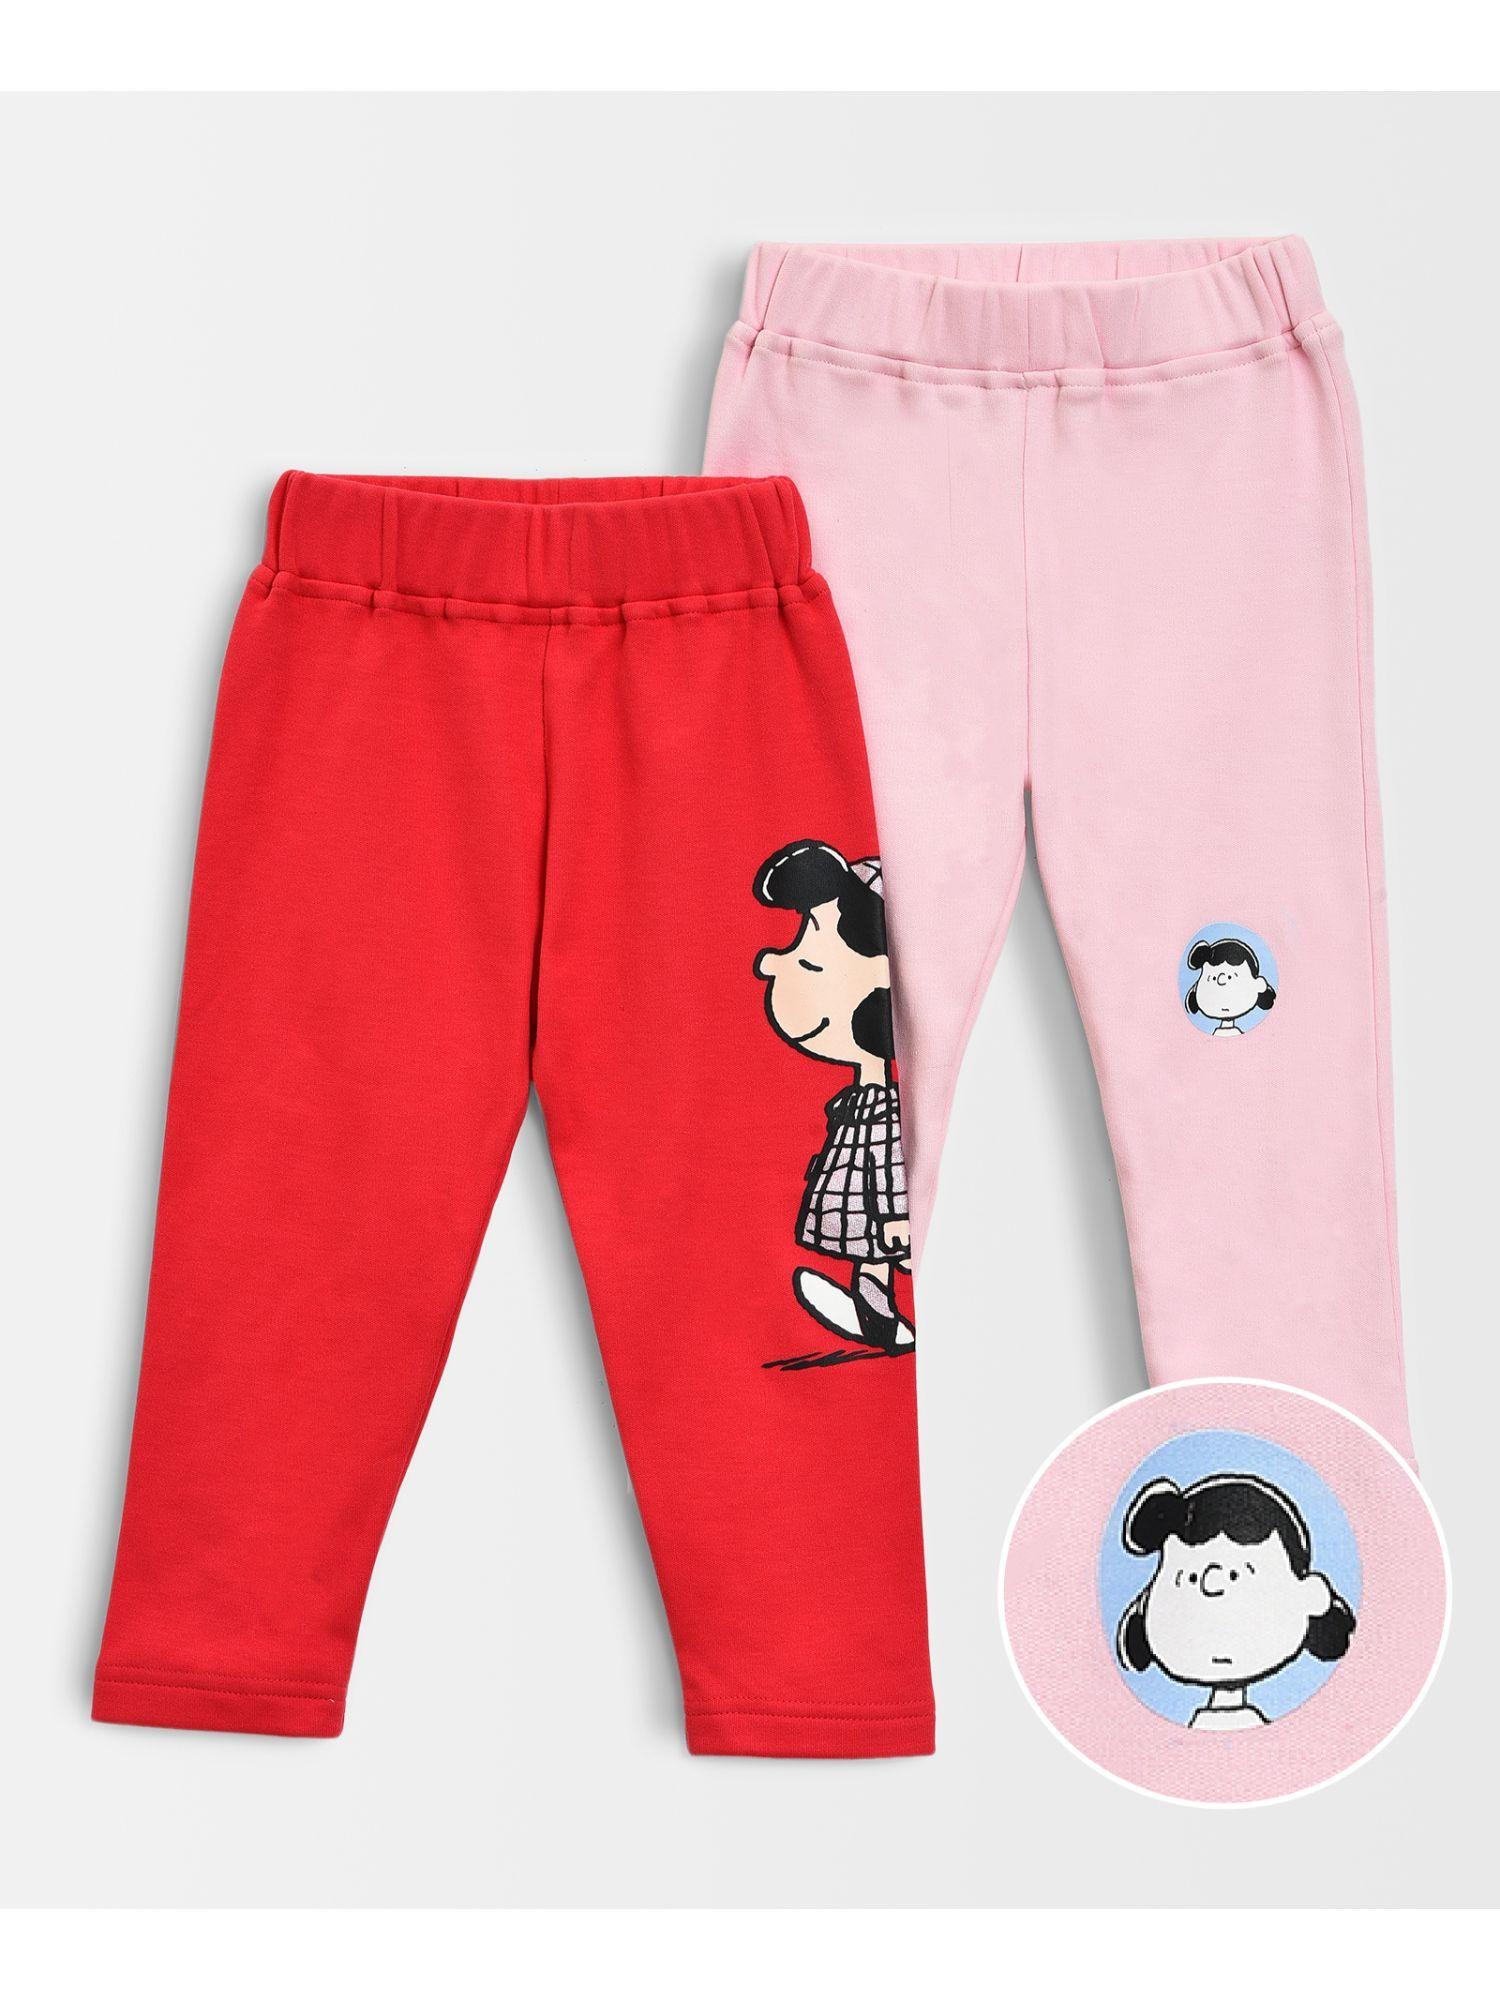 peanuts printed cotton leggings for baby girl (pack of 2)